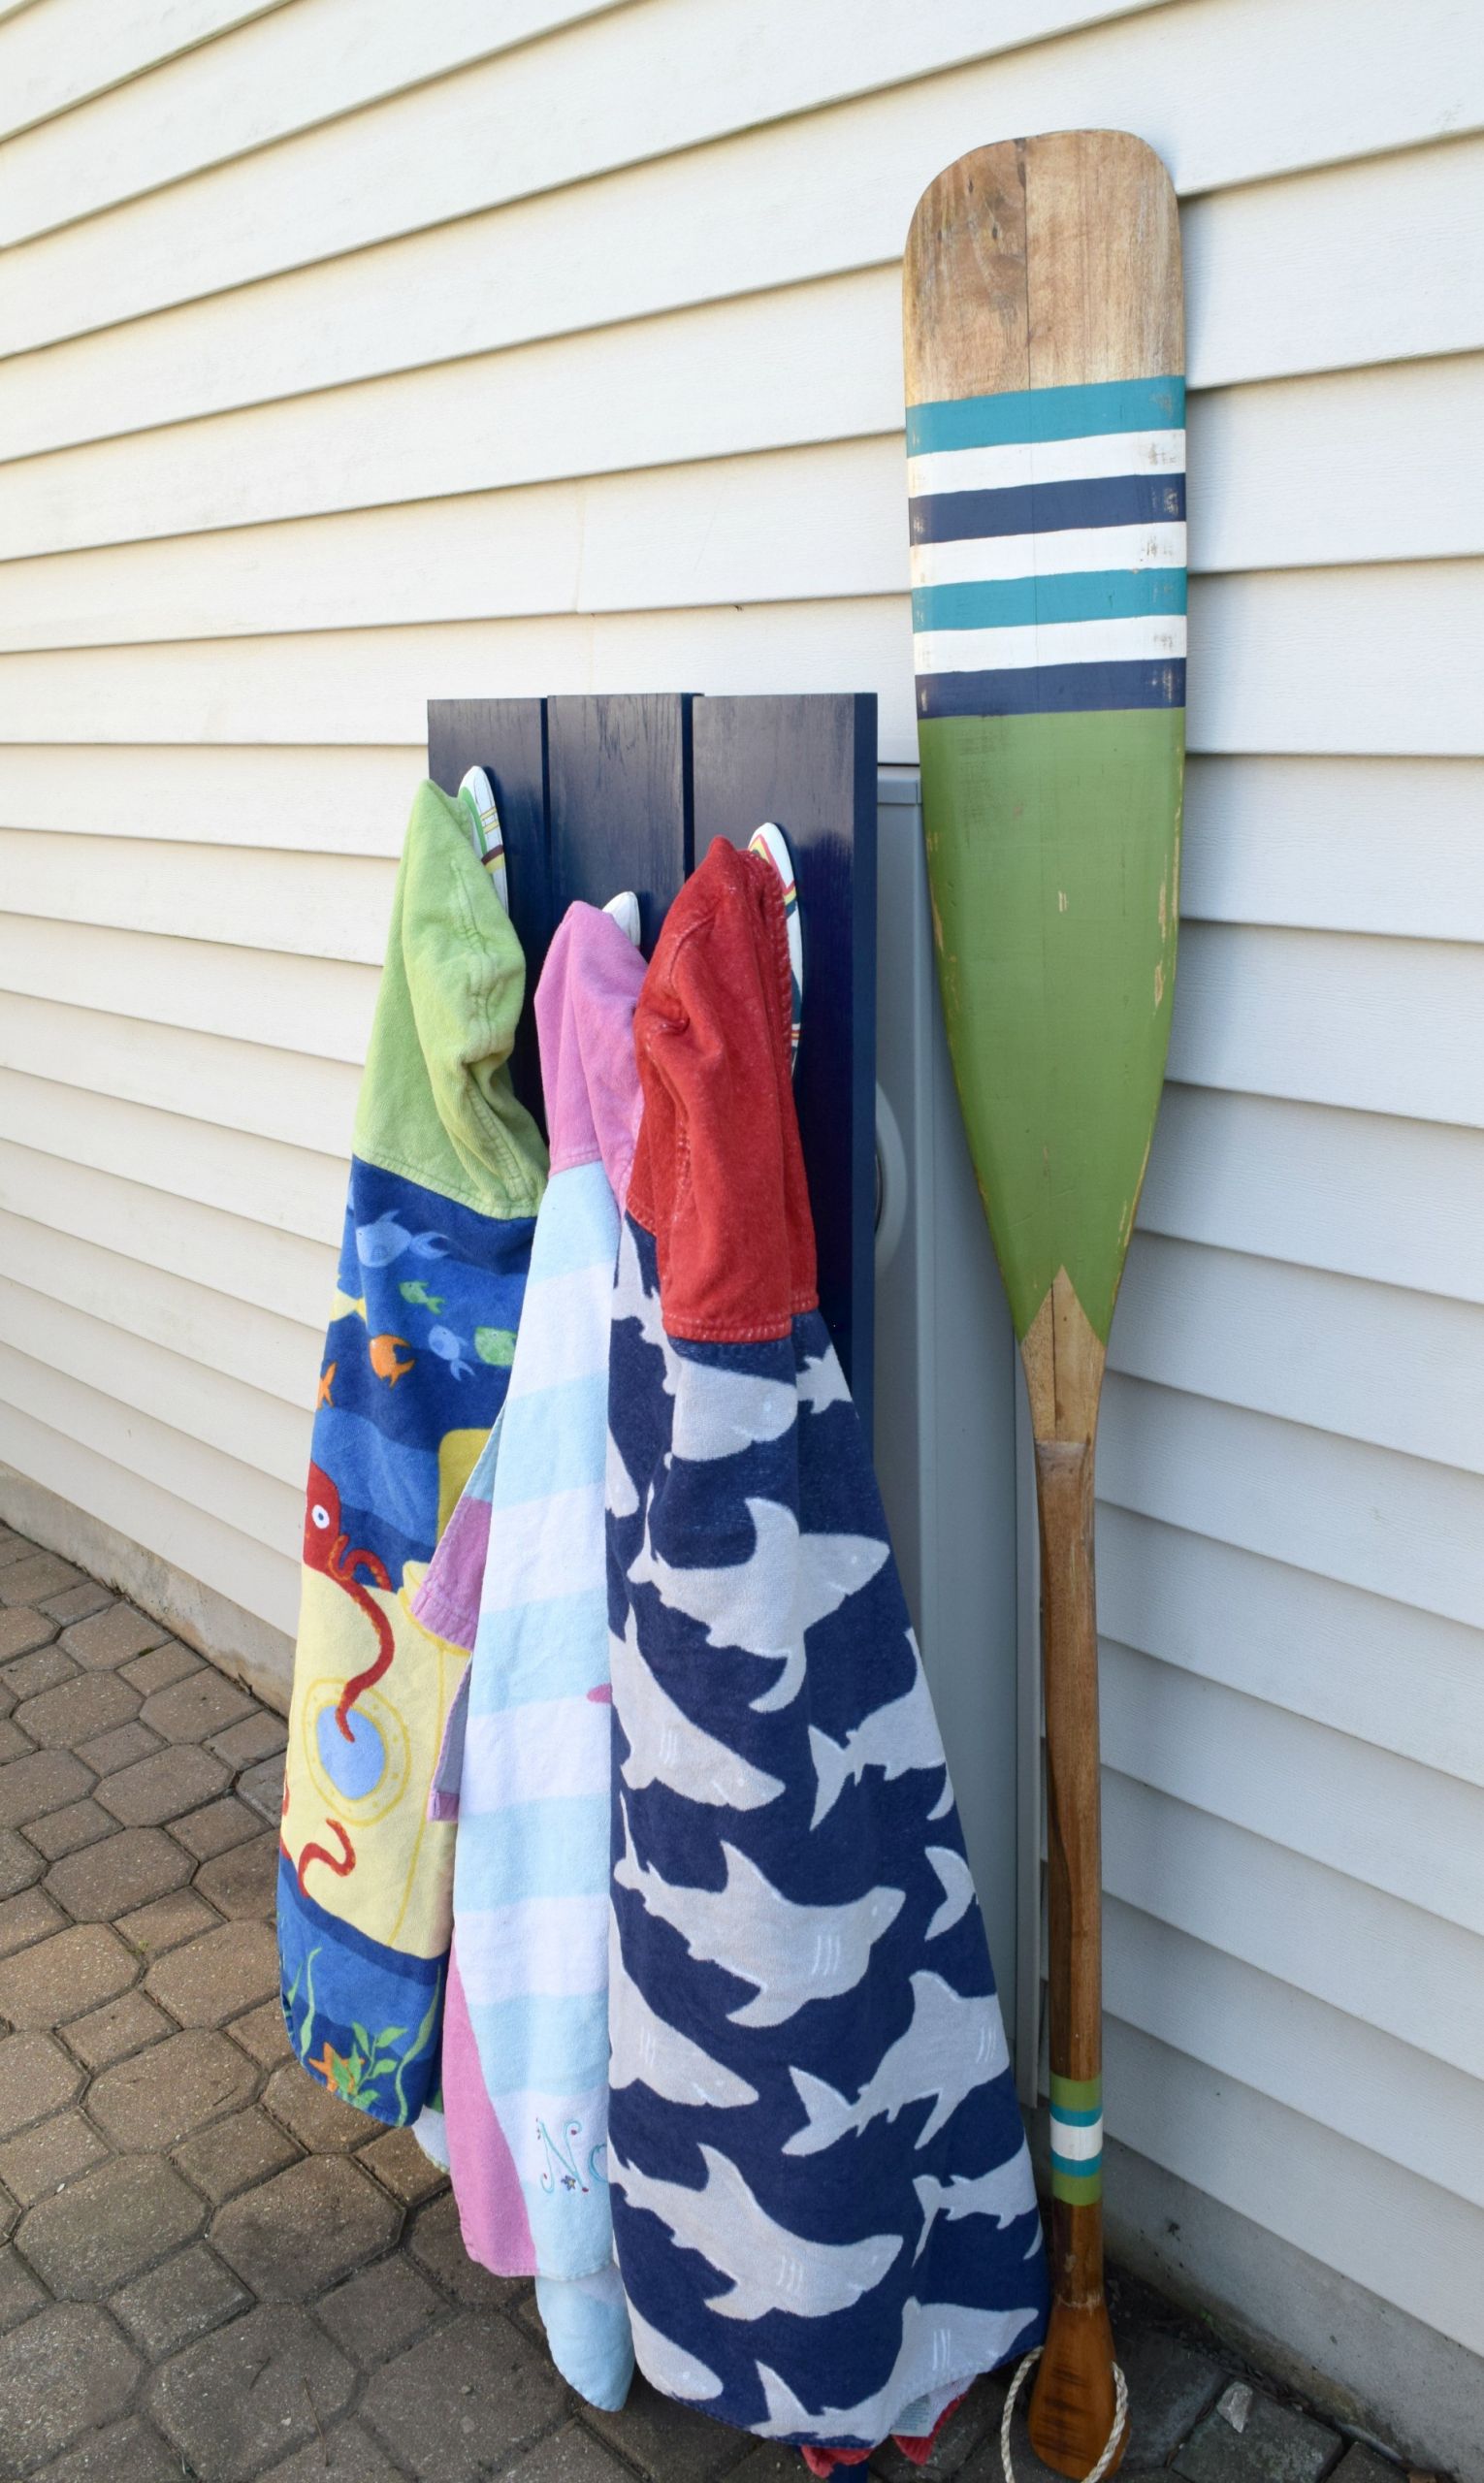 DIY Outdoor Towel Rack
 How to camouflage the electric box and make a DIY towel